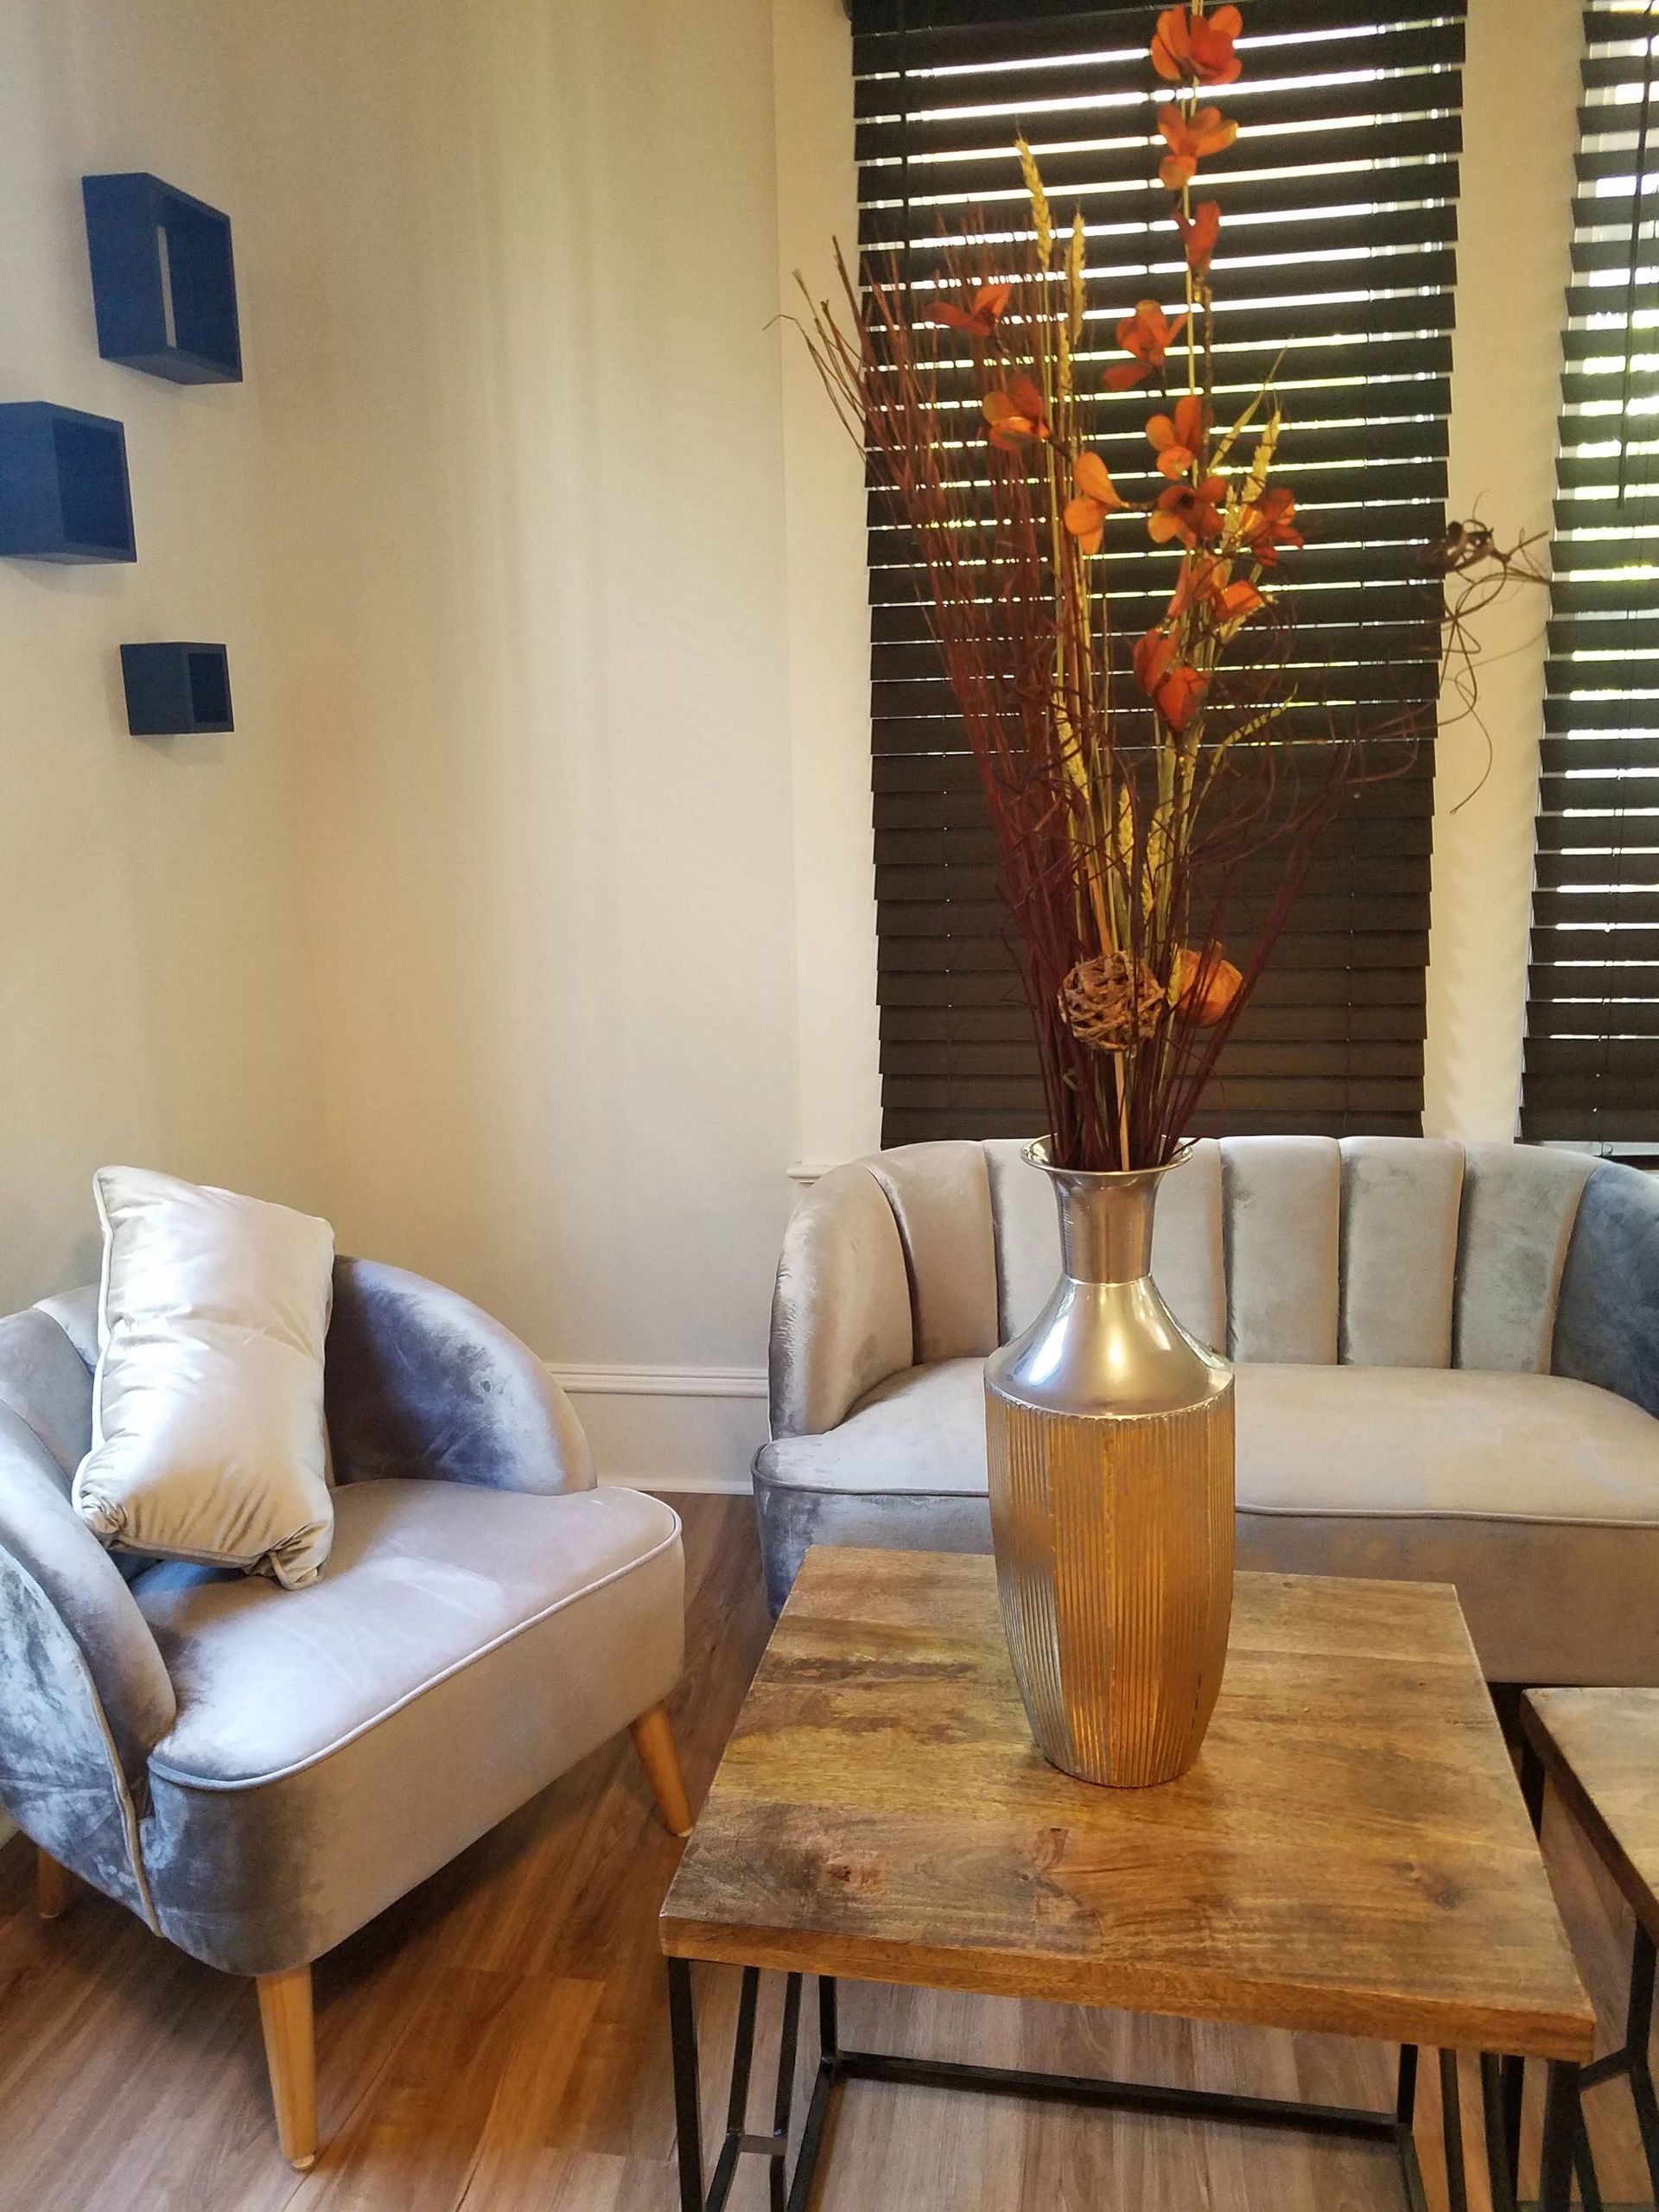 Rooms For Rent Urban Suites For Rent Downtown Raleigh Nc